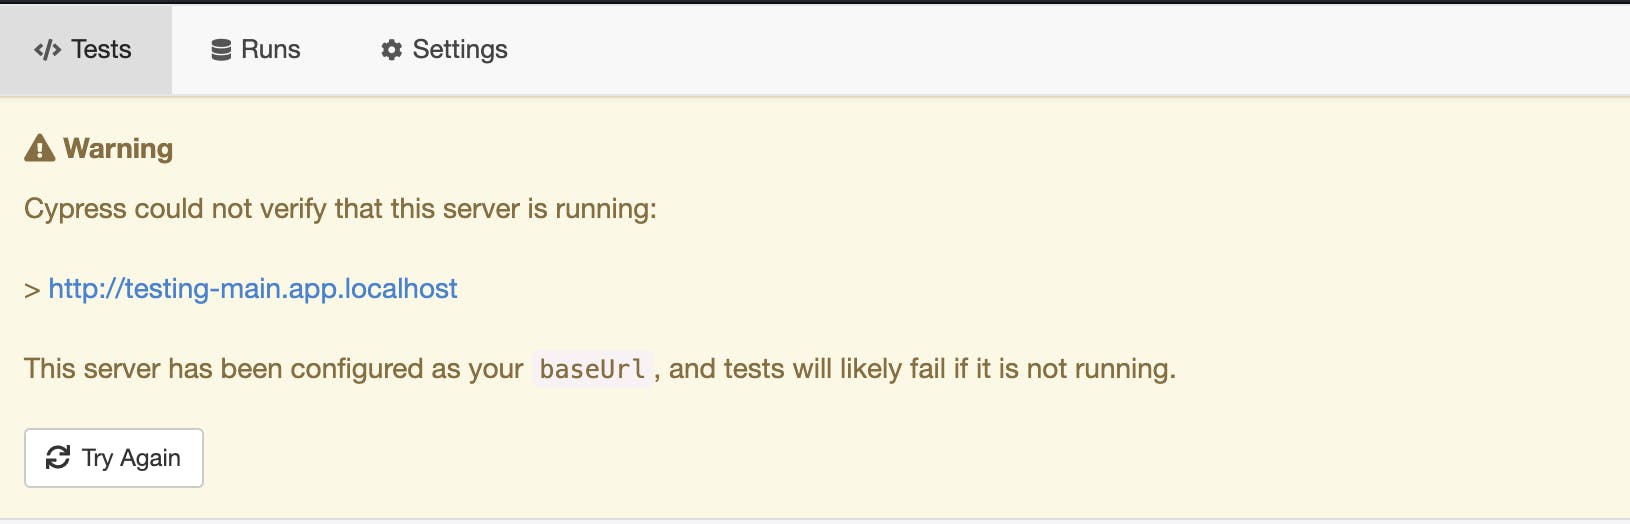 Warning from Cypress test runner that it cannot verify test server is running